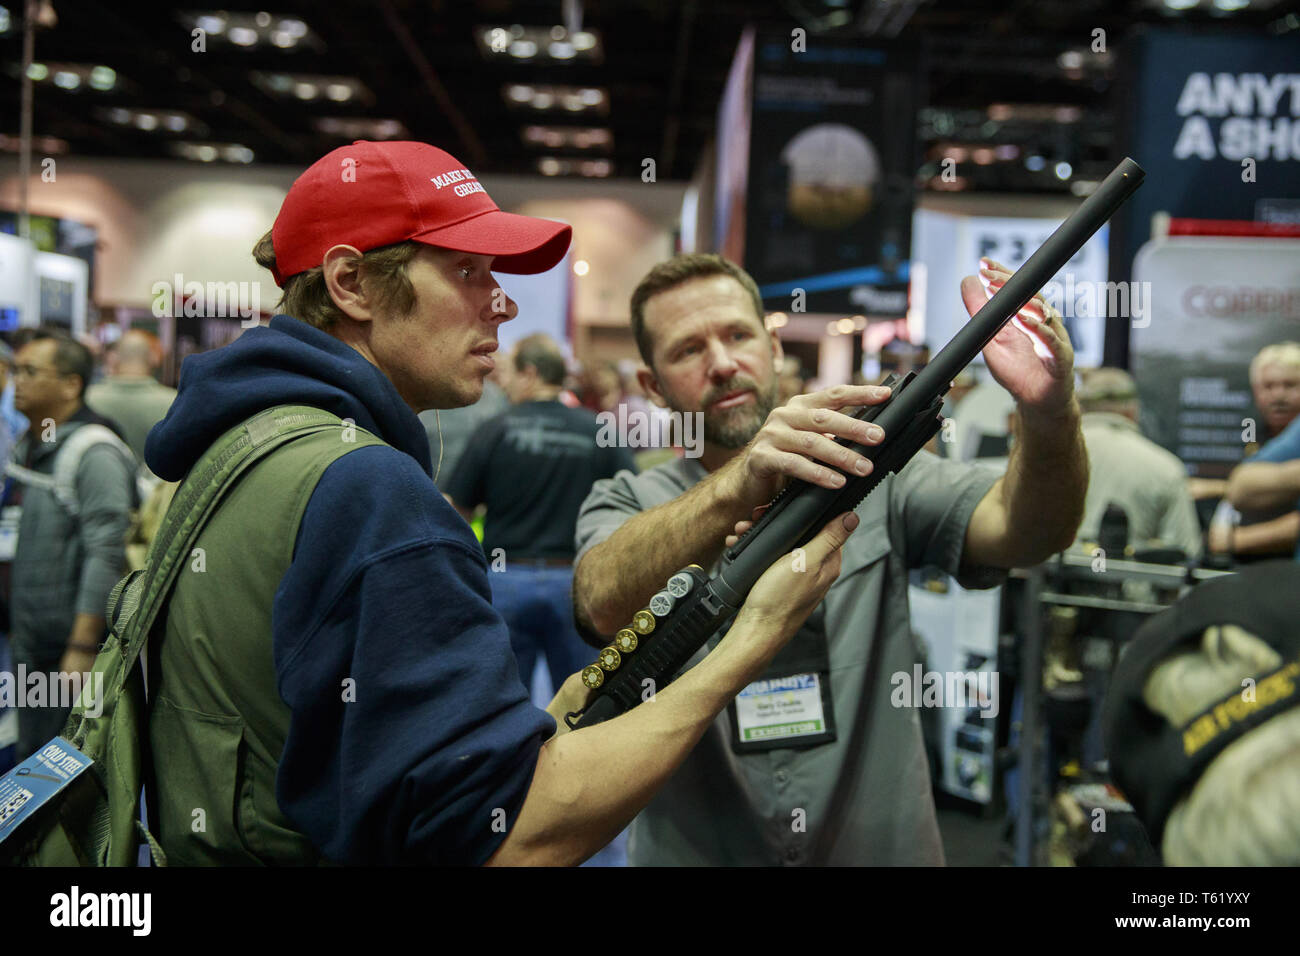 Indianapolis, Indiana, UK. 27th Apr, 2019. An NRA member and Trump supporter wearing a MAGA hat looks at a shotgun during the third day of the National Rifle Association convention. Credit: Jeremy Hogan/SOPA Images/ZUMA Wire/Alamy Live News Stock Photo